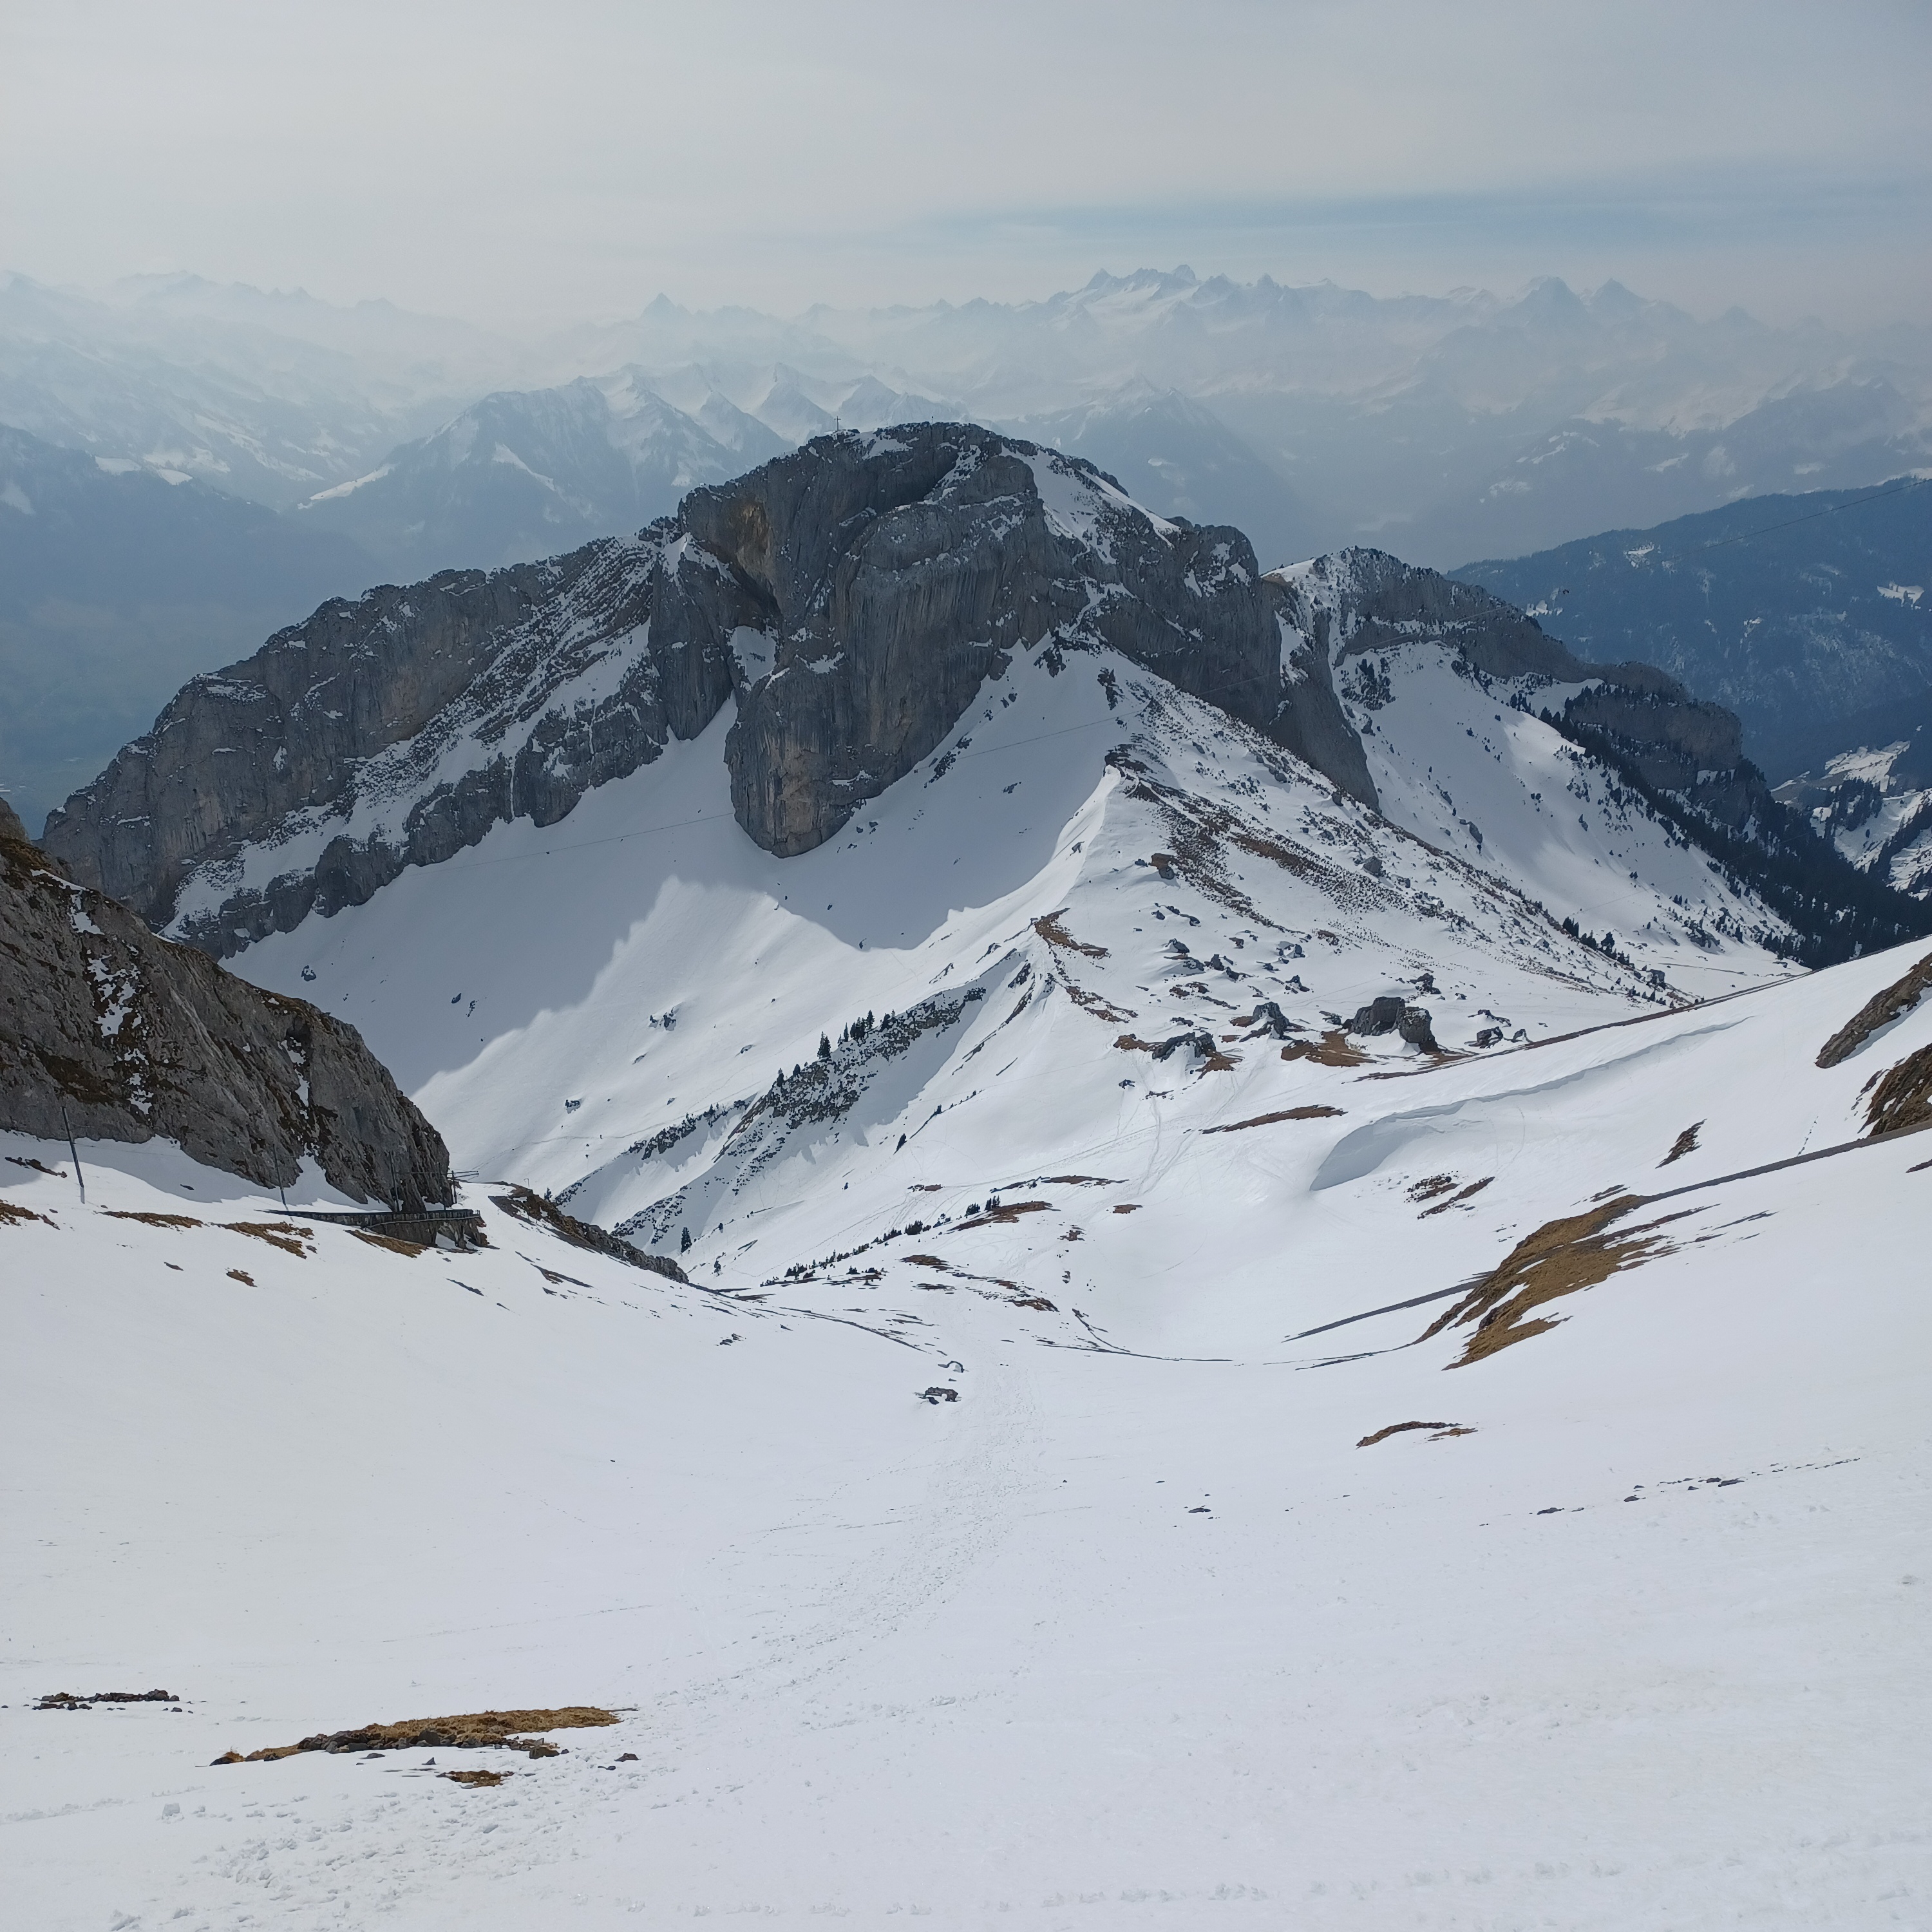 Matthorn from Pilatus Kulm with alps visible in the background